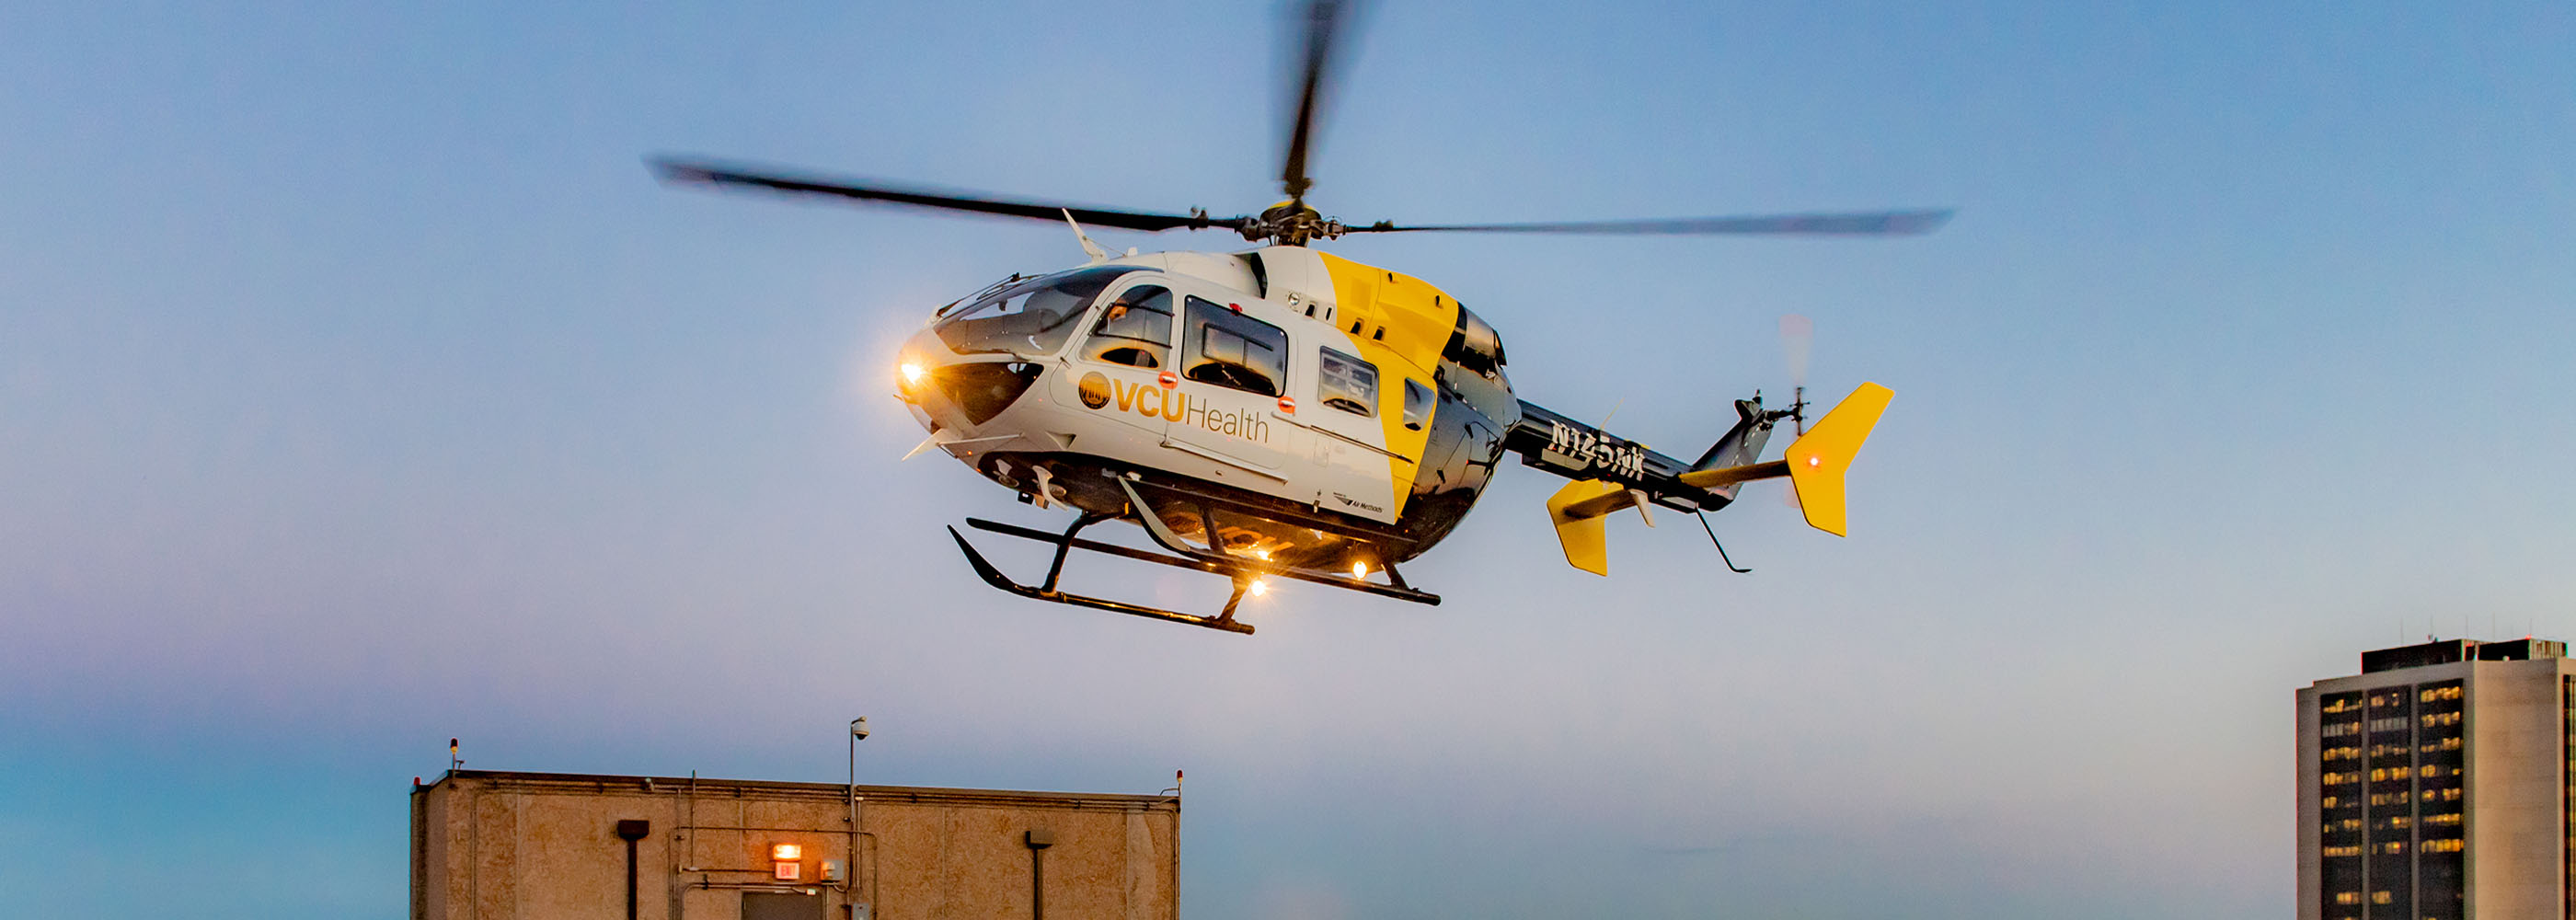 VCU Health helicopter banner